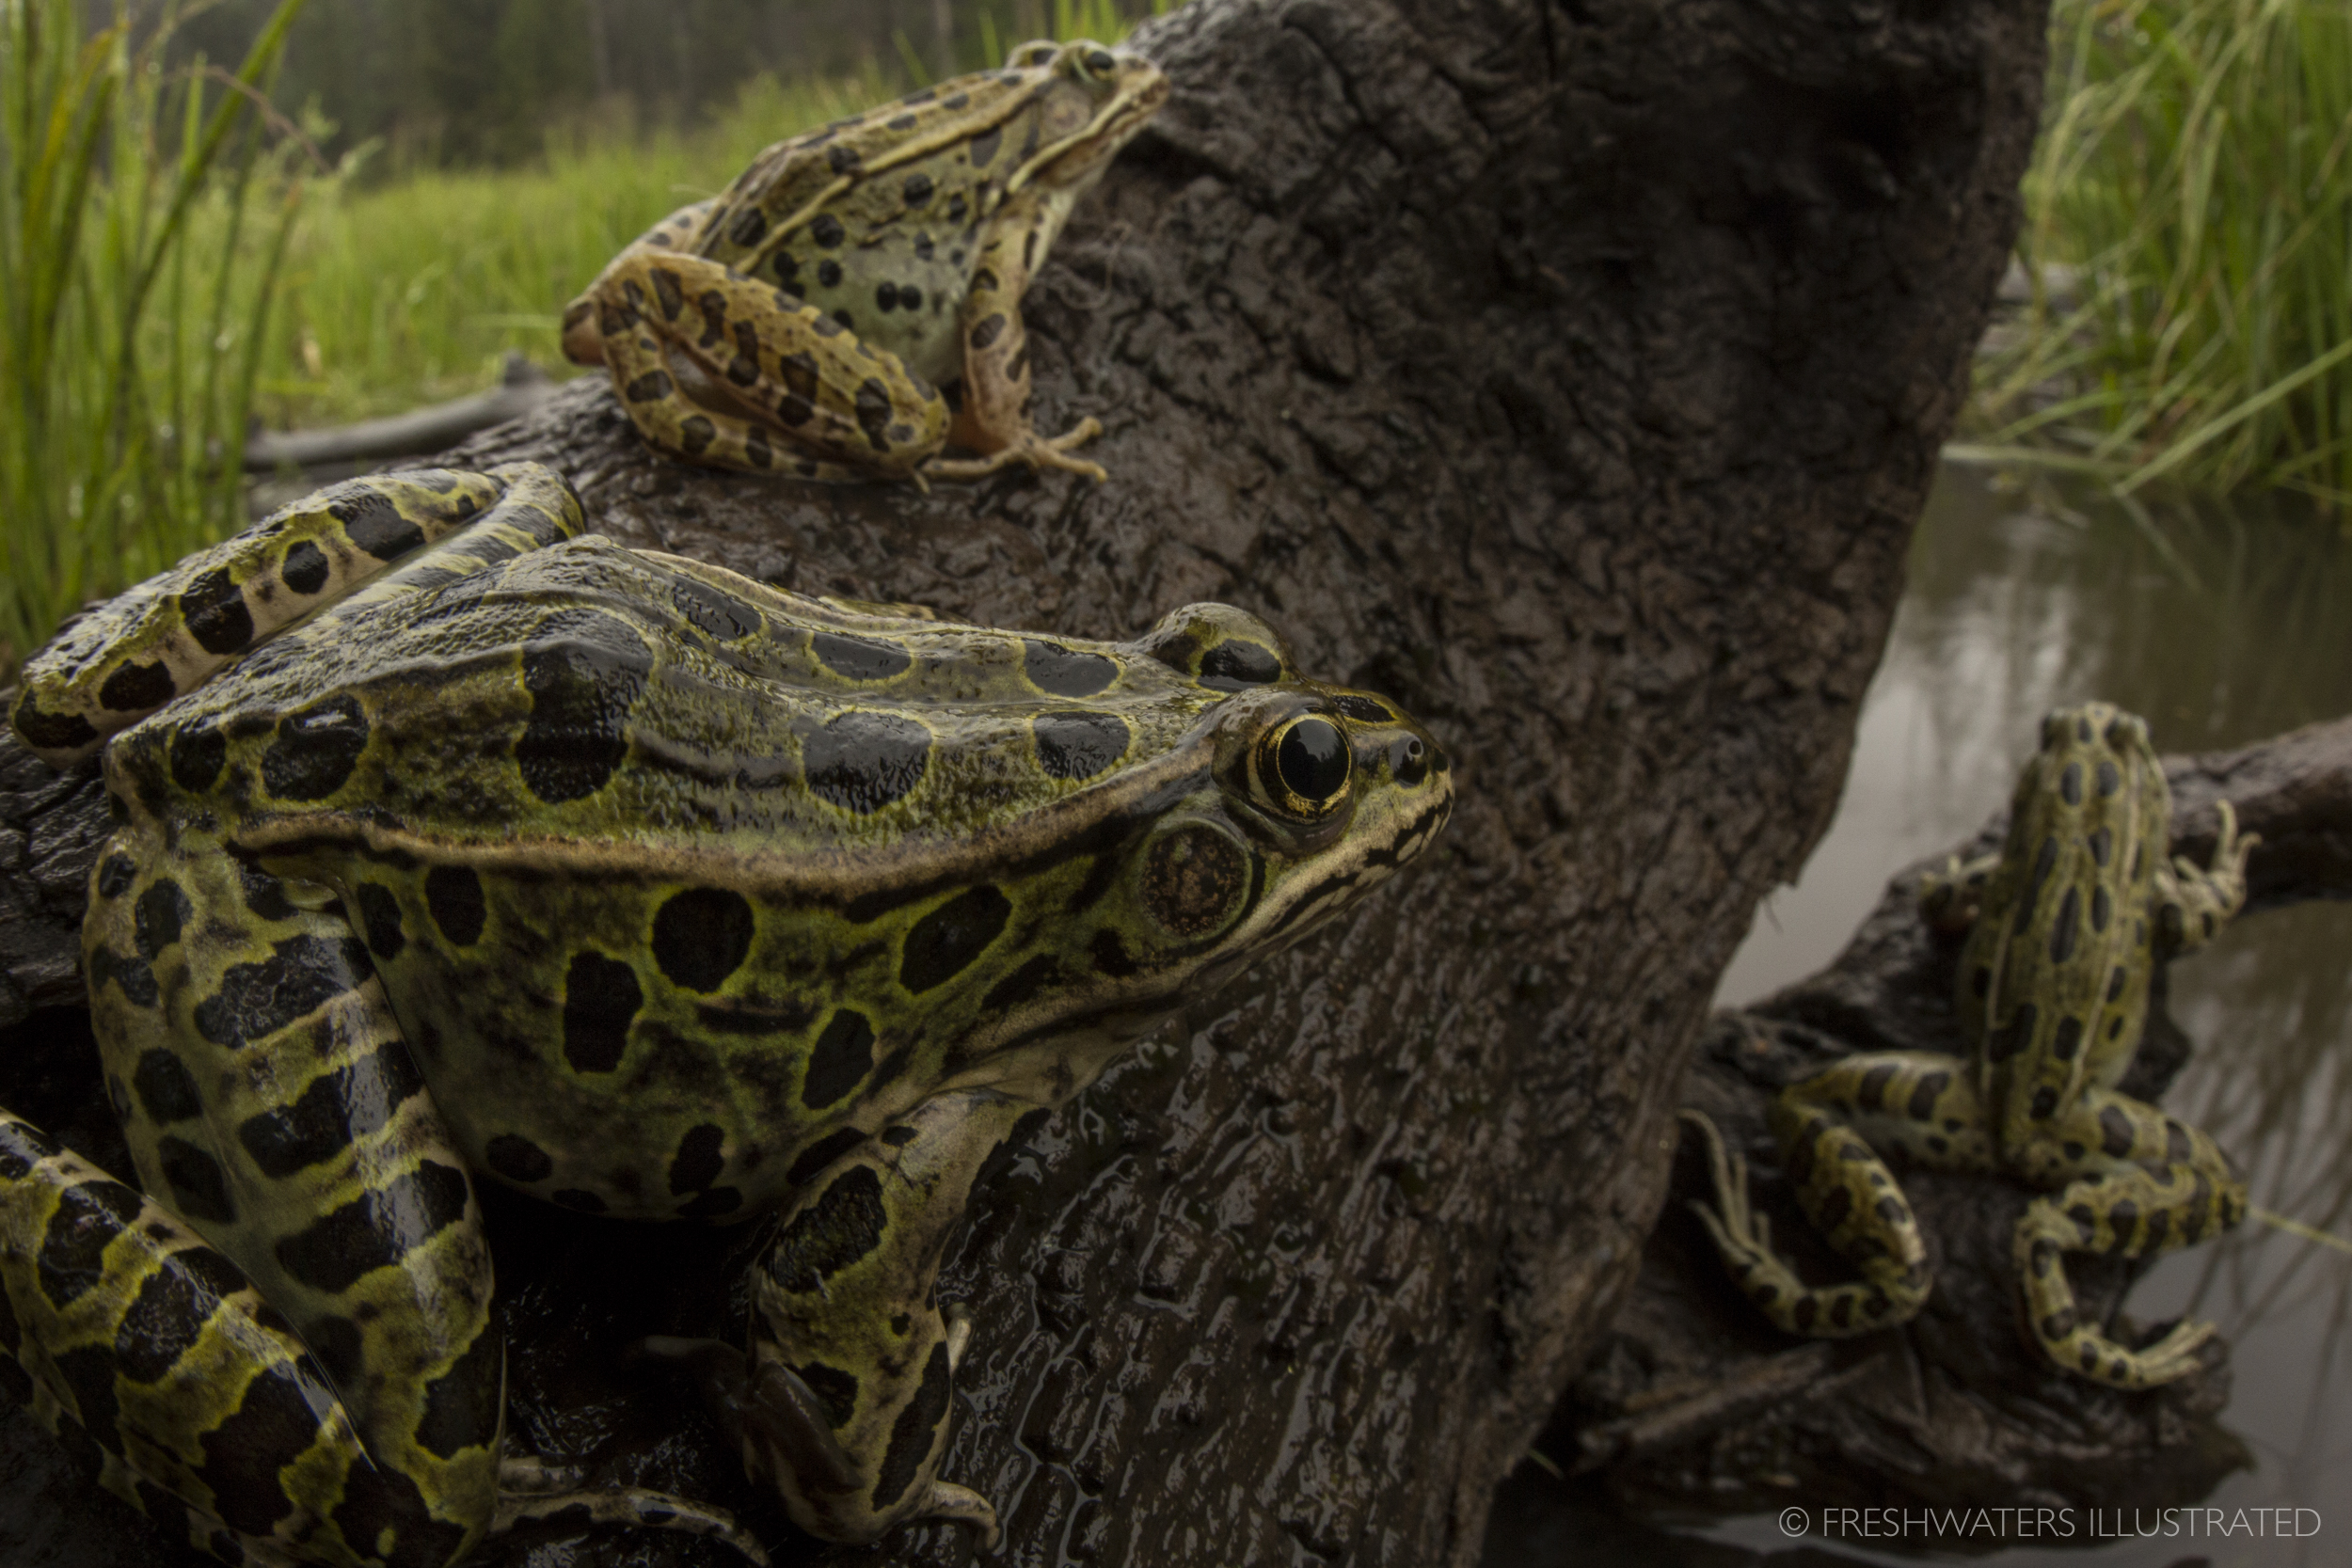  Once extremely common in many wetlands throughout the Northern and Western parts of the US, the Northern Leopard frog (Rana pipiens) has been lost from vast portions of its native range. Especially in the West, where scenes such as this are becoming